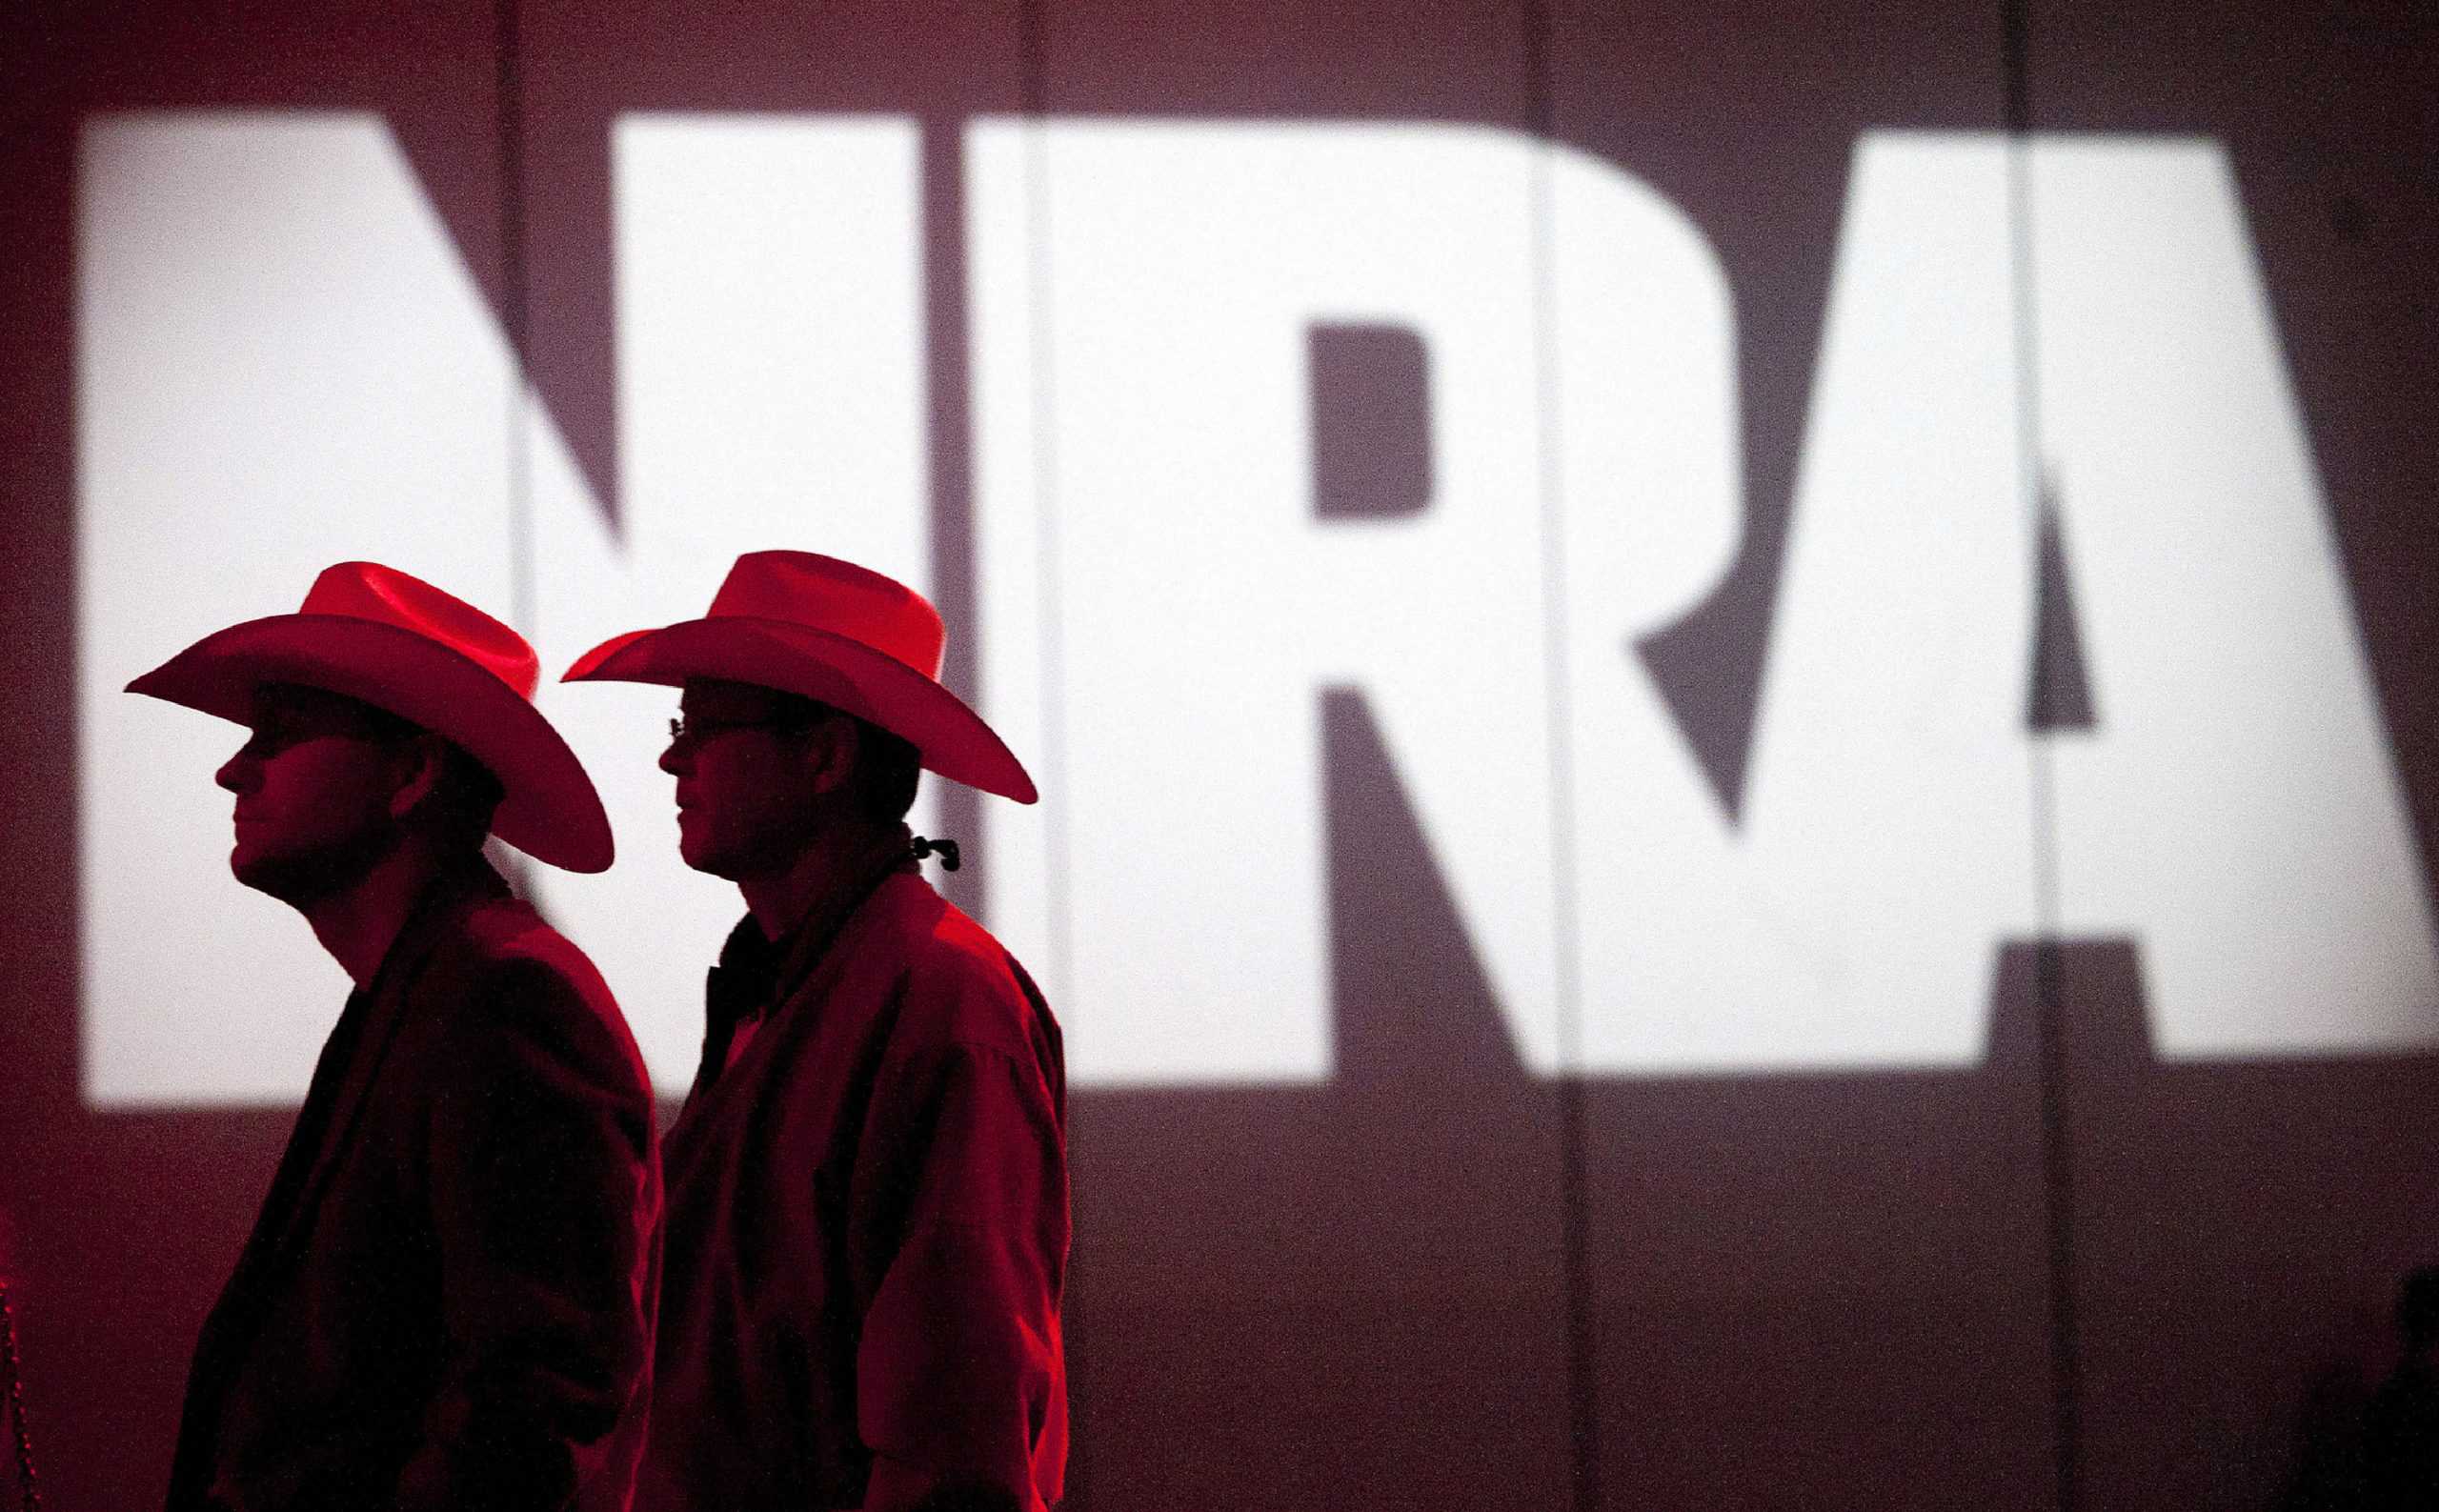 ‘Least distressing news of the pandemic’ as National Rifle Association files for bankruptcy